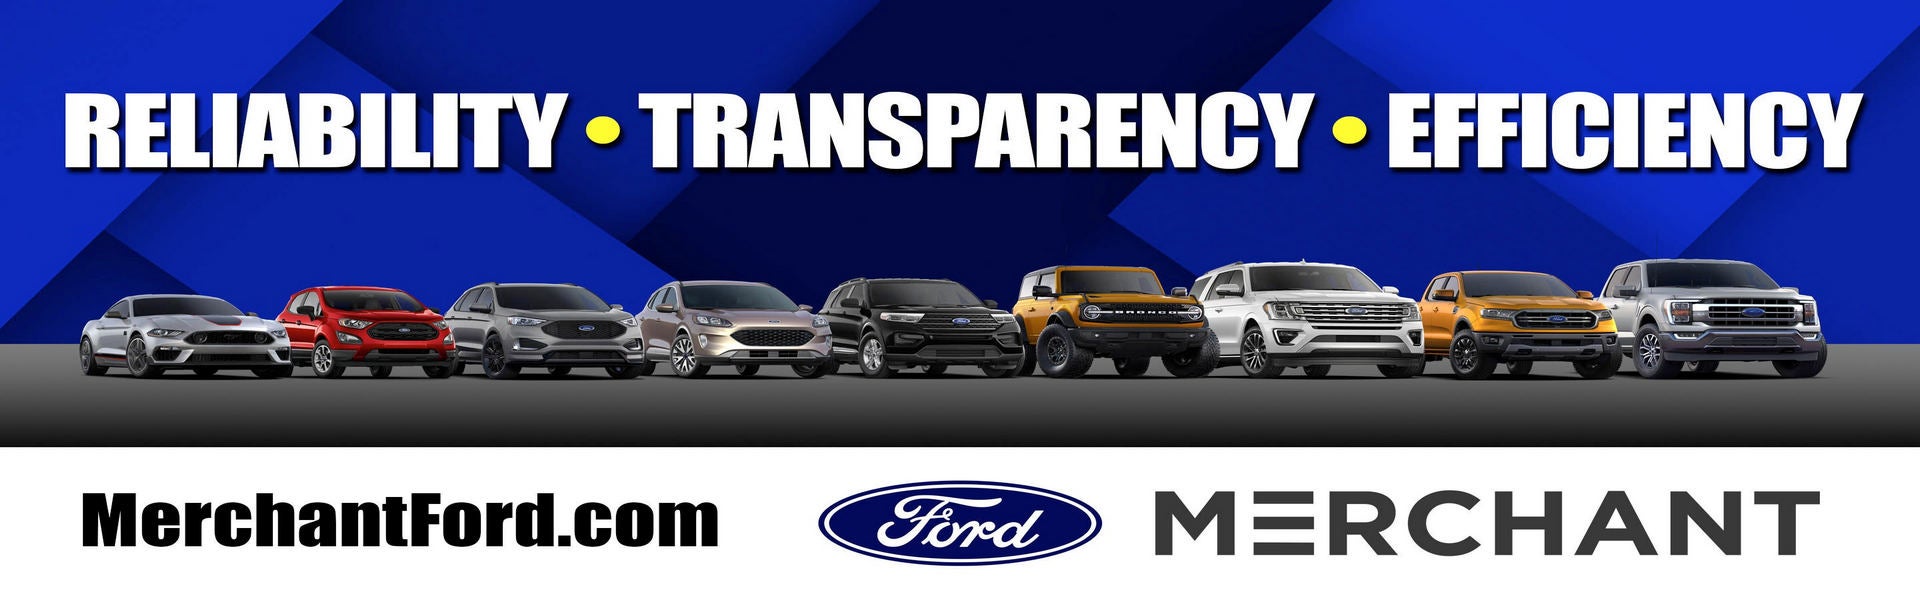 All New Ford Vehicles